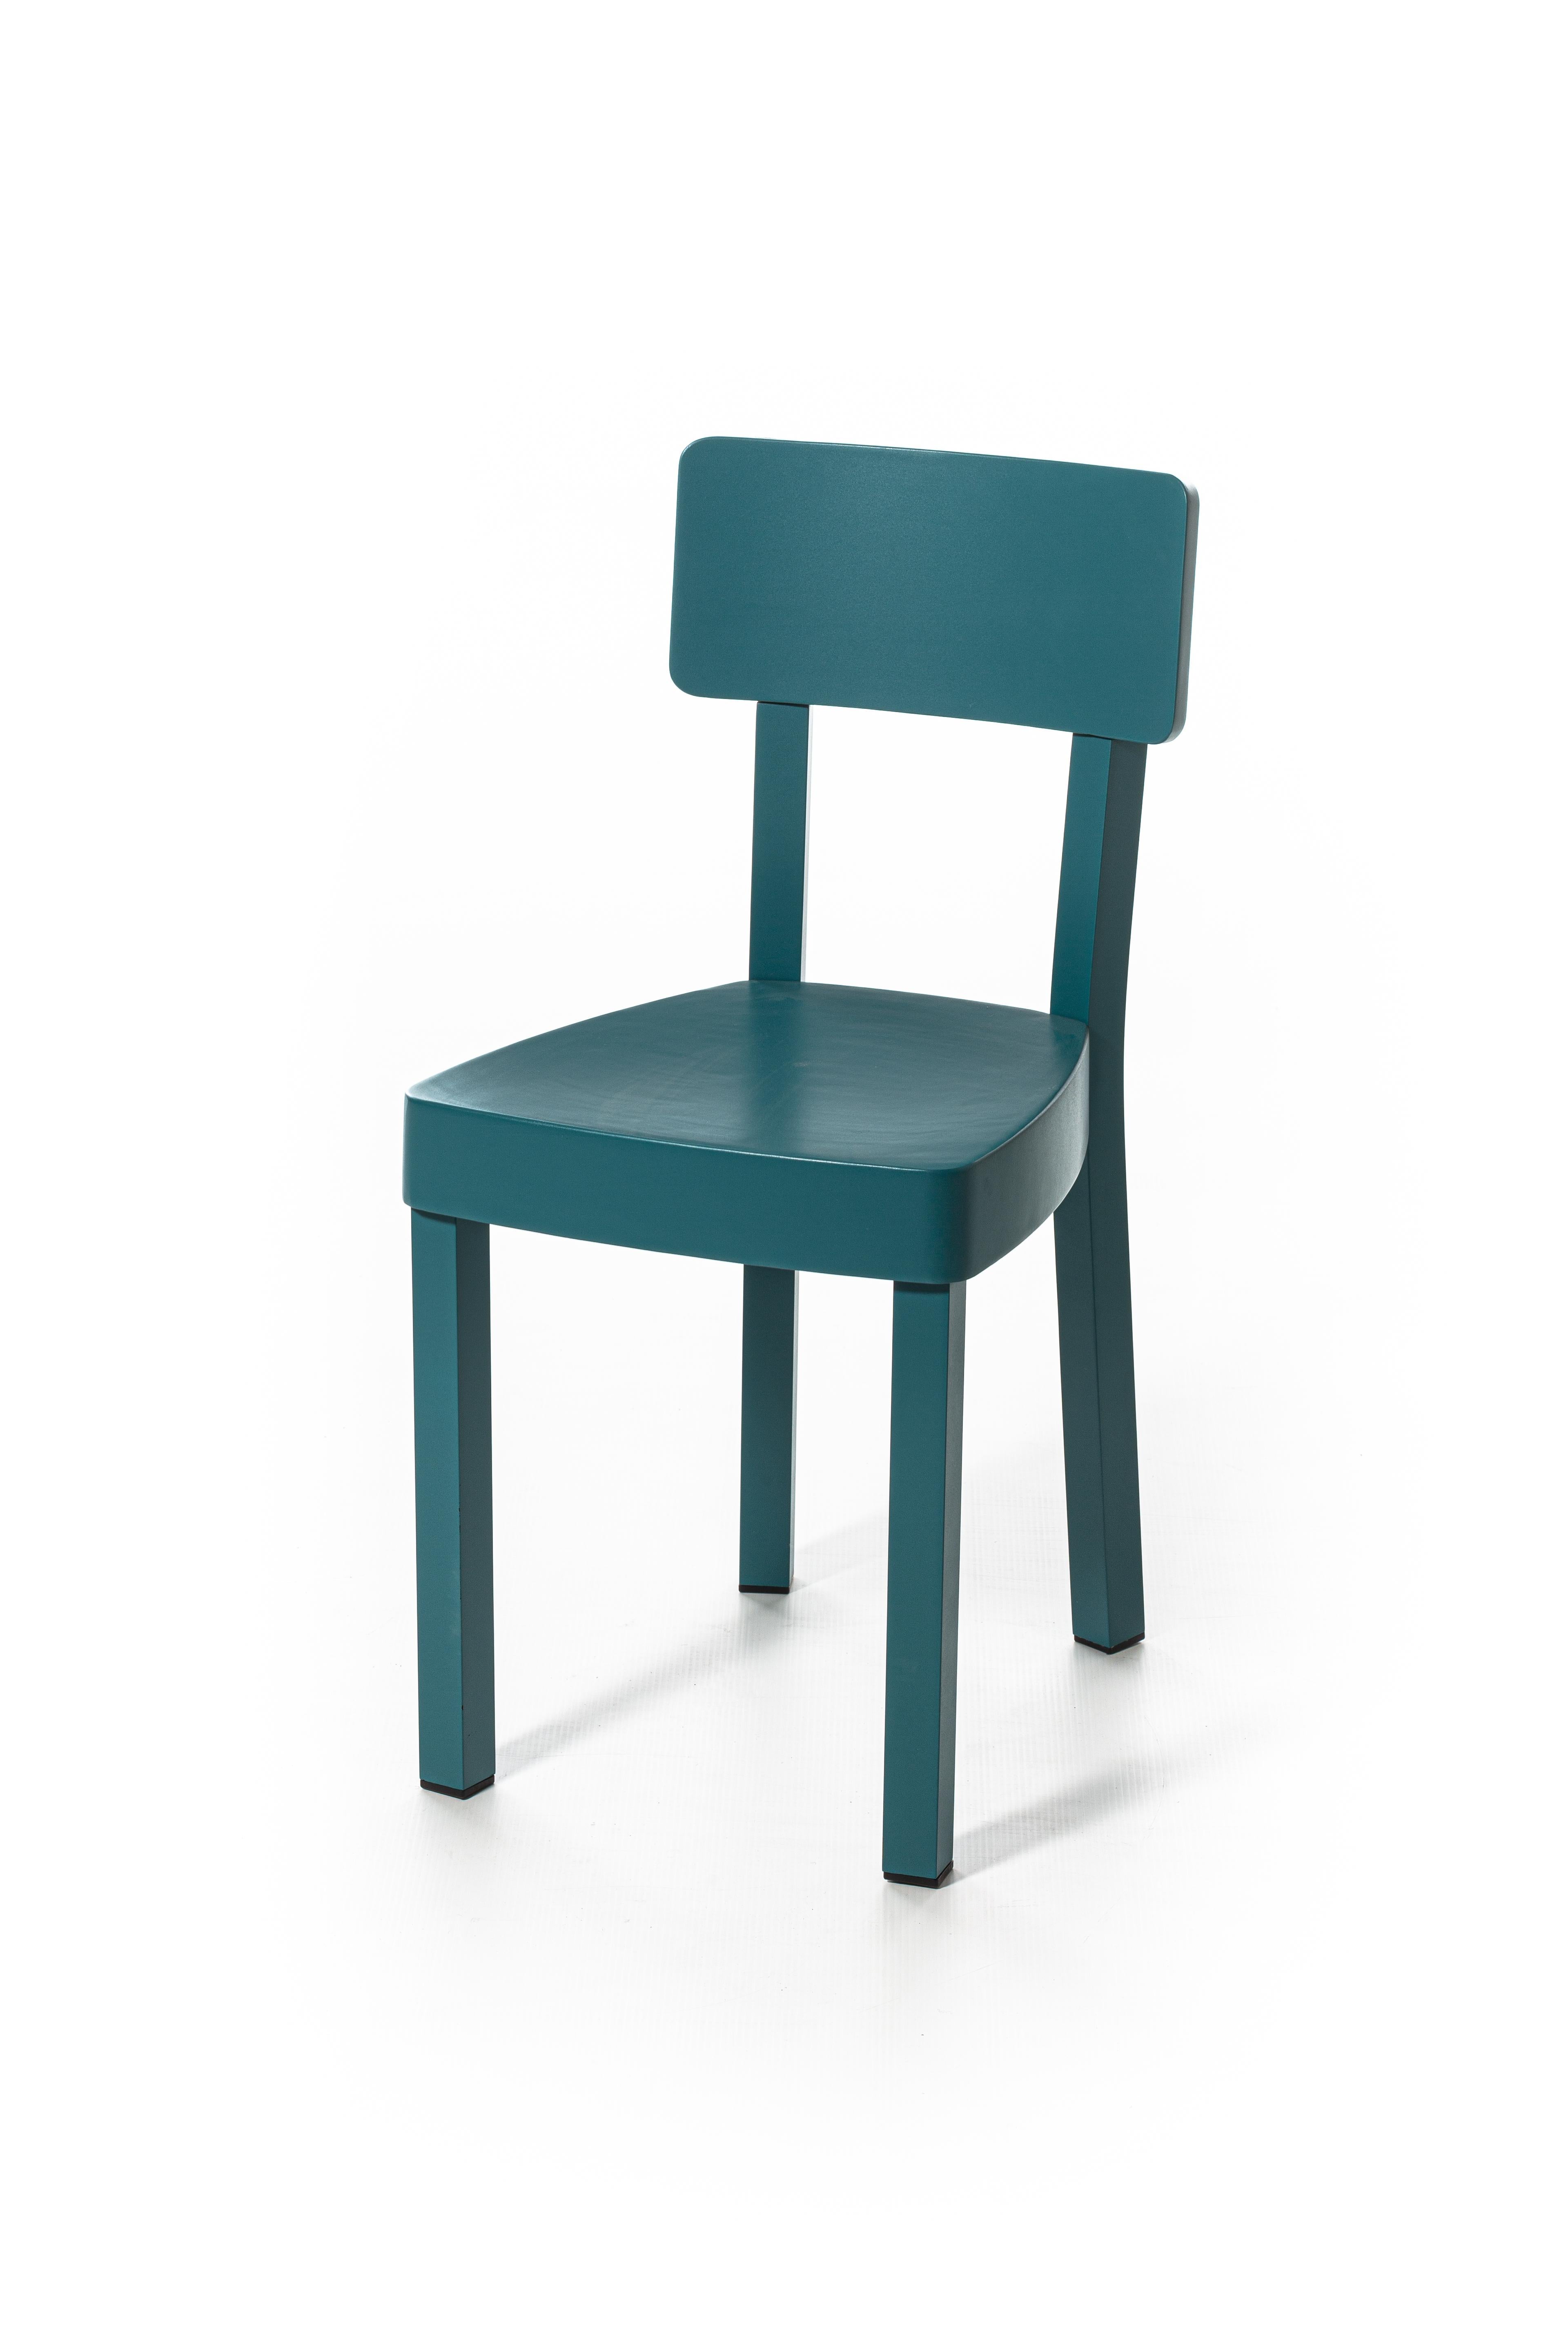 Gervasoni Inout 23 outdoor chair in teal lacquered aluminum by Paola Navone

Chair in lacquered cast aluminum, available in glossy white and orange and embossed gray, sage and teal.

Additional Information:
Material: Cast aluminum
Frame